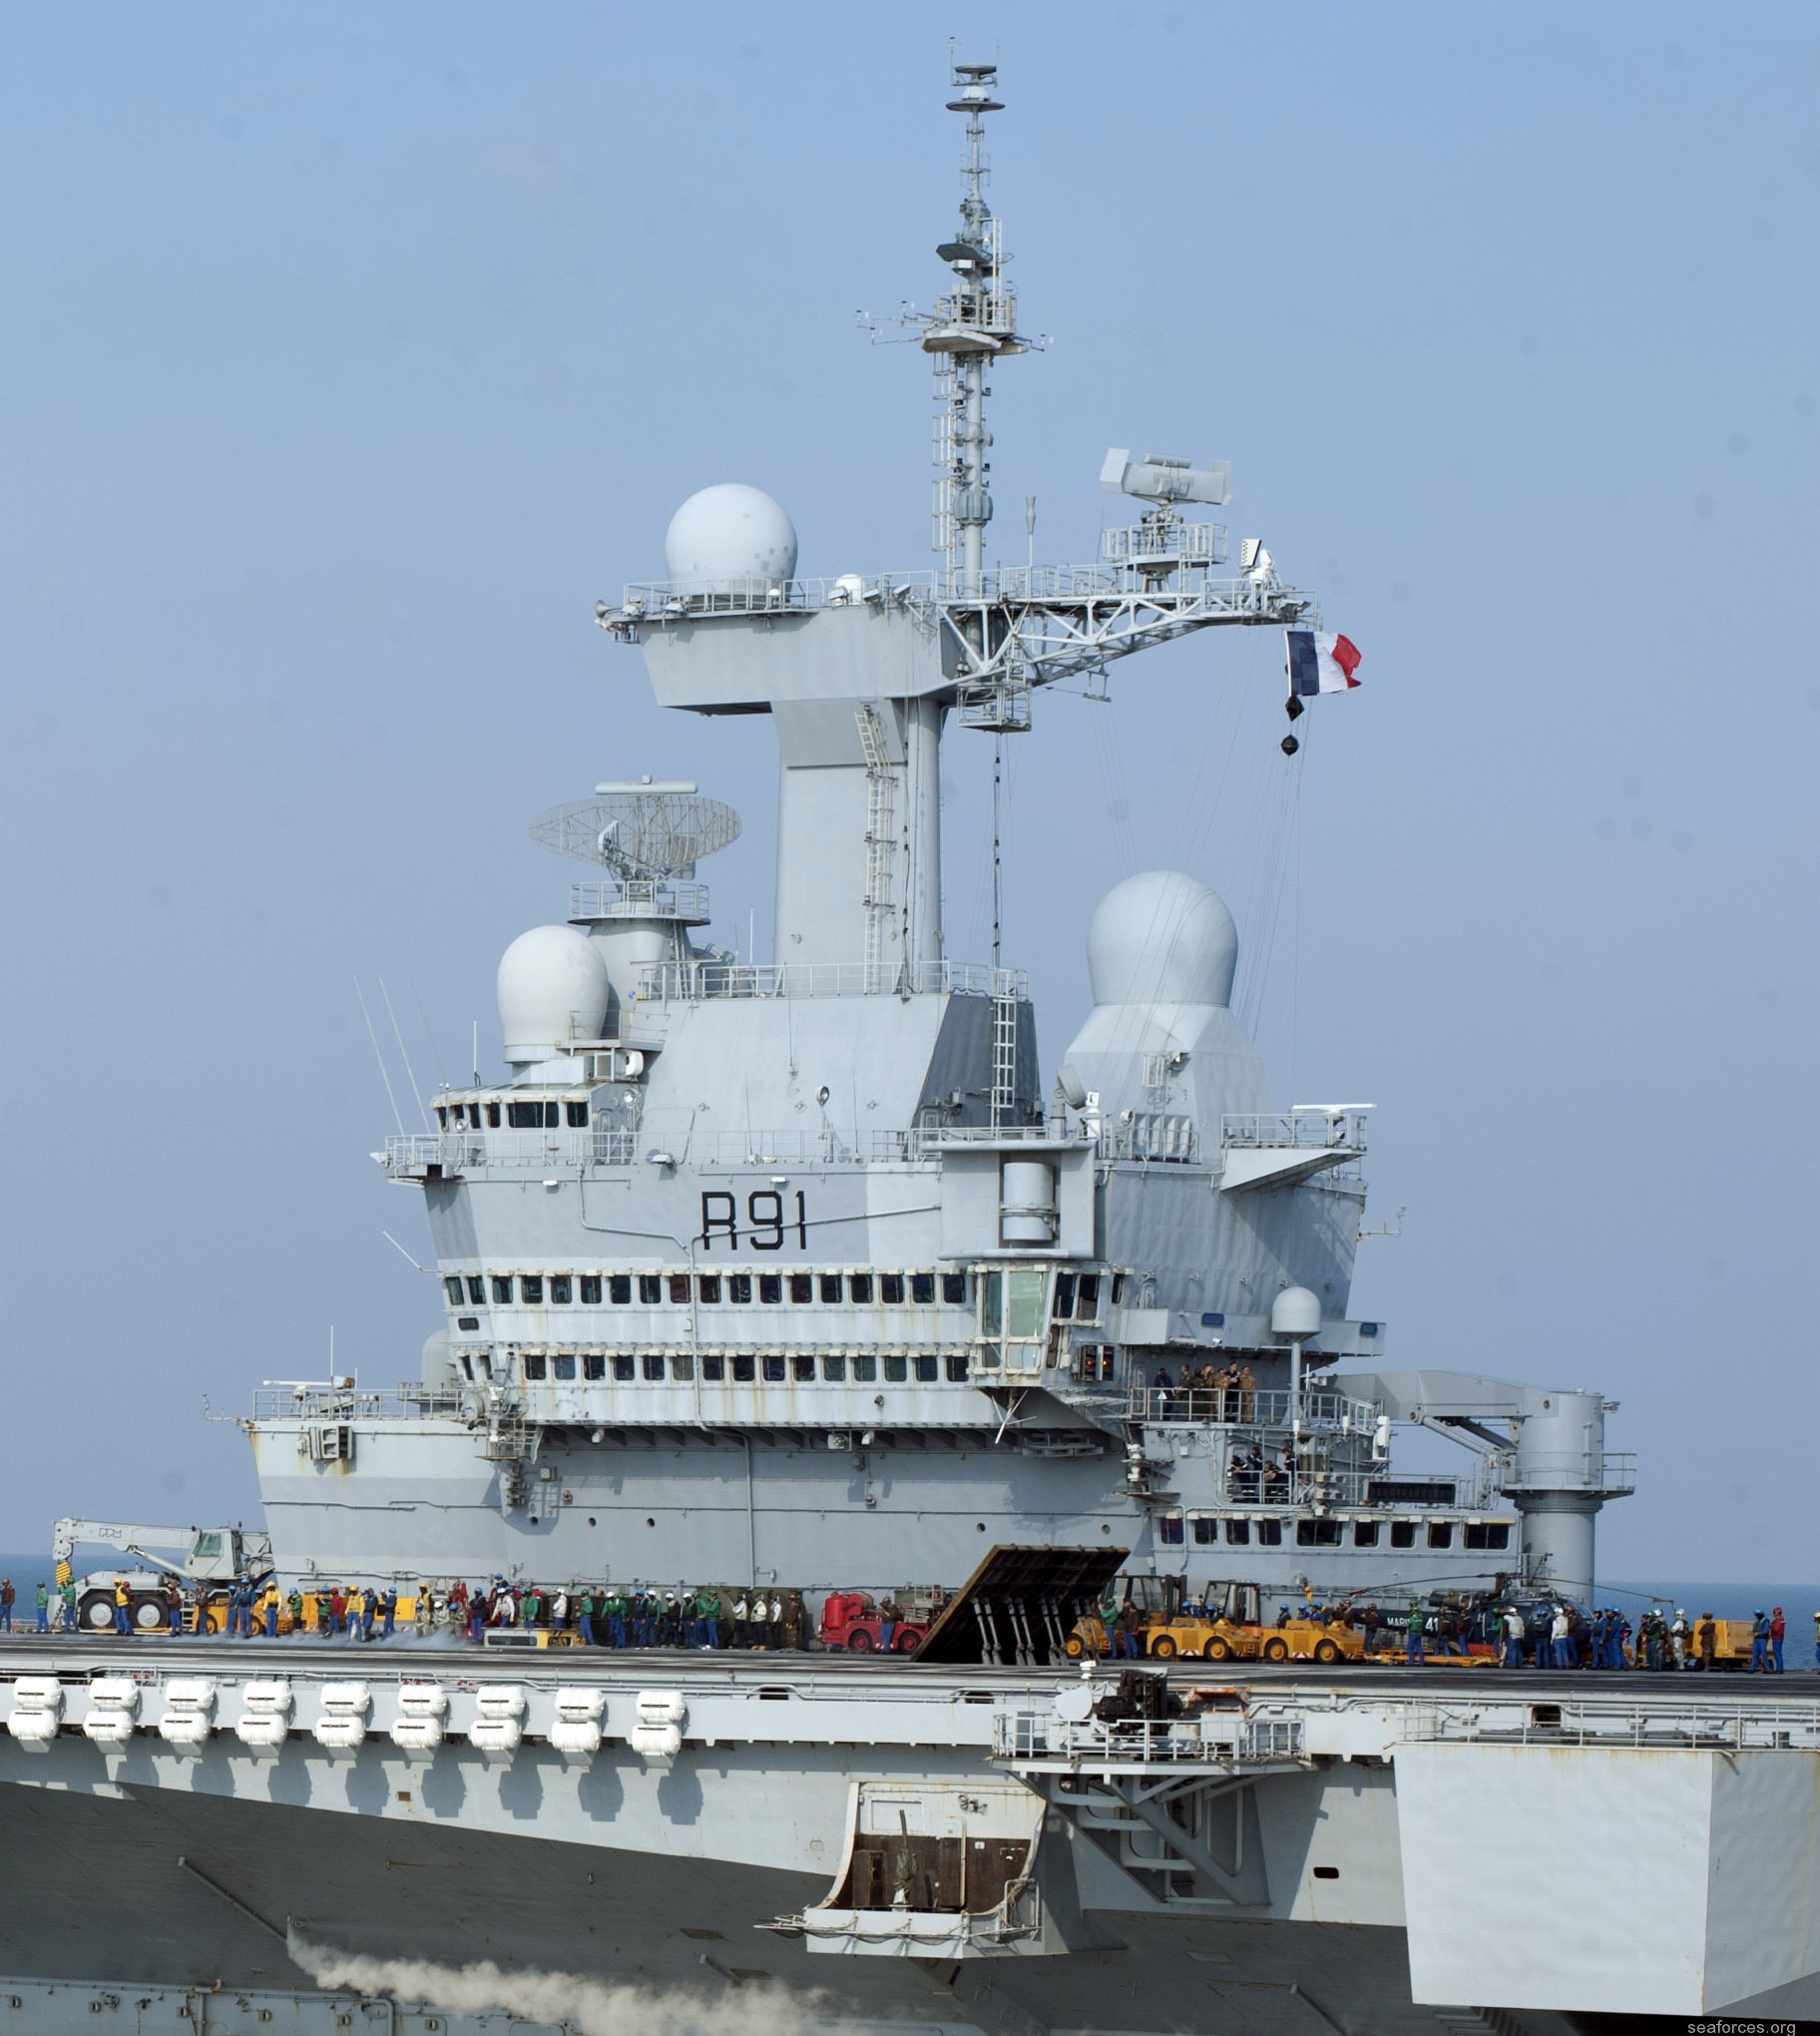  r-91 fs charles de gaulle aircraft carrier french navy 13 island superstructure